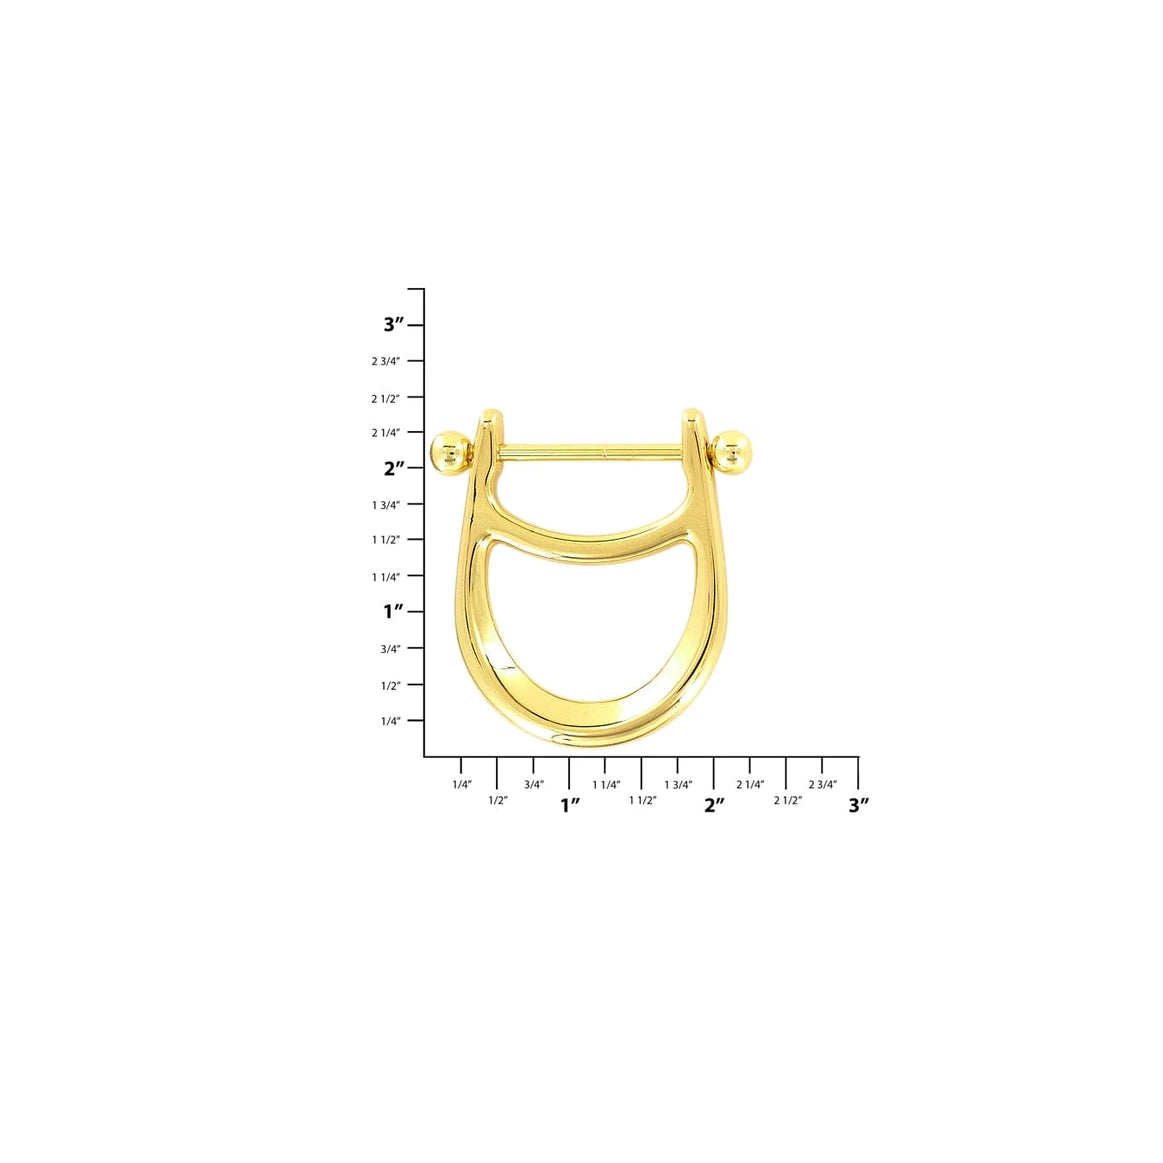 1 1/4" Shiny Gold, Horseshoe D Ring with Screw-In Pin, Zinc Alloy, #C-2102-GOLD